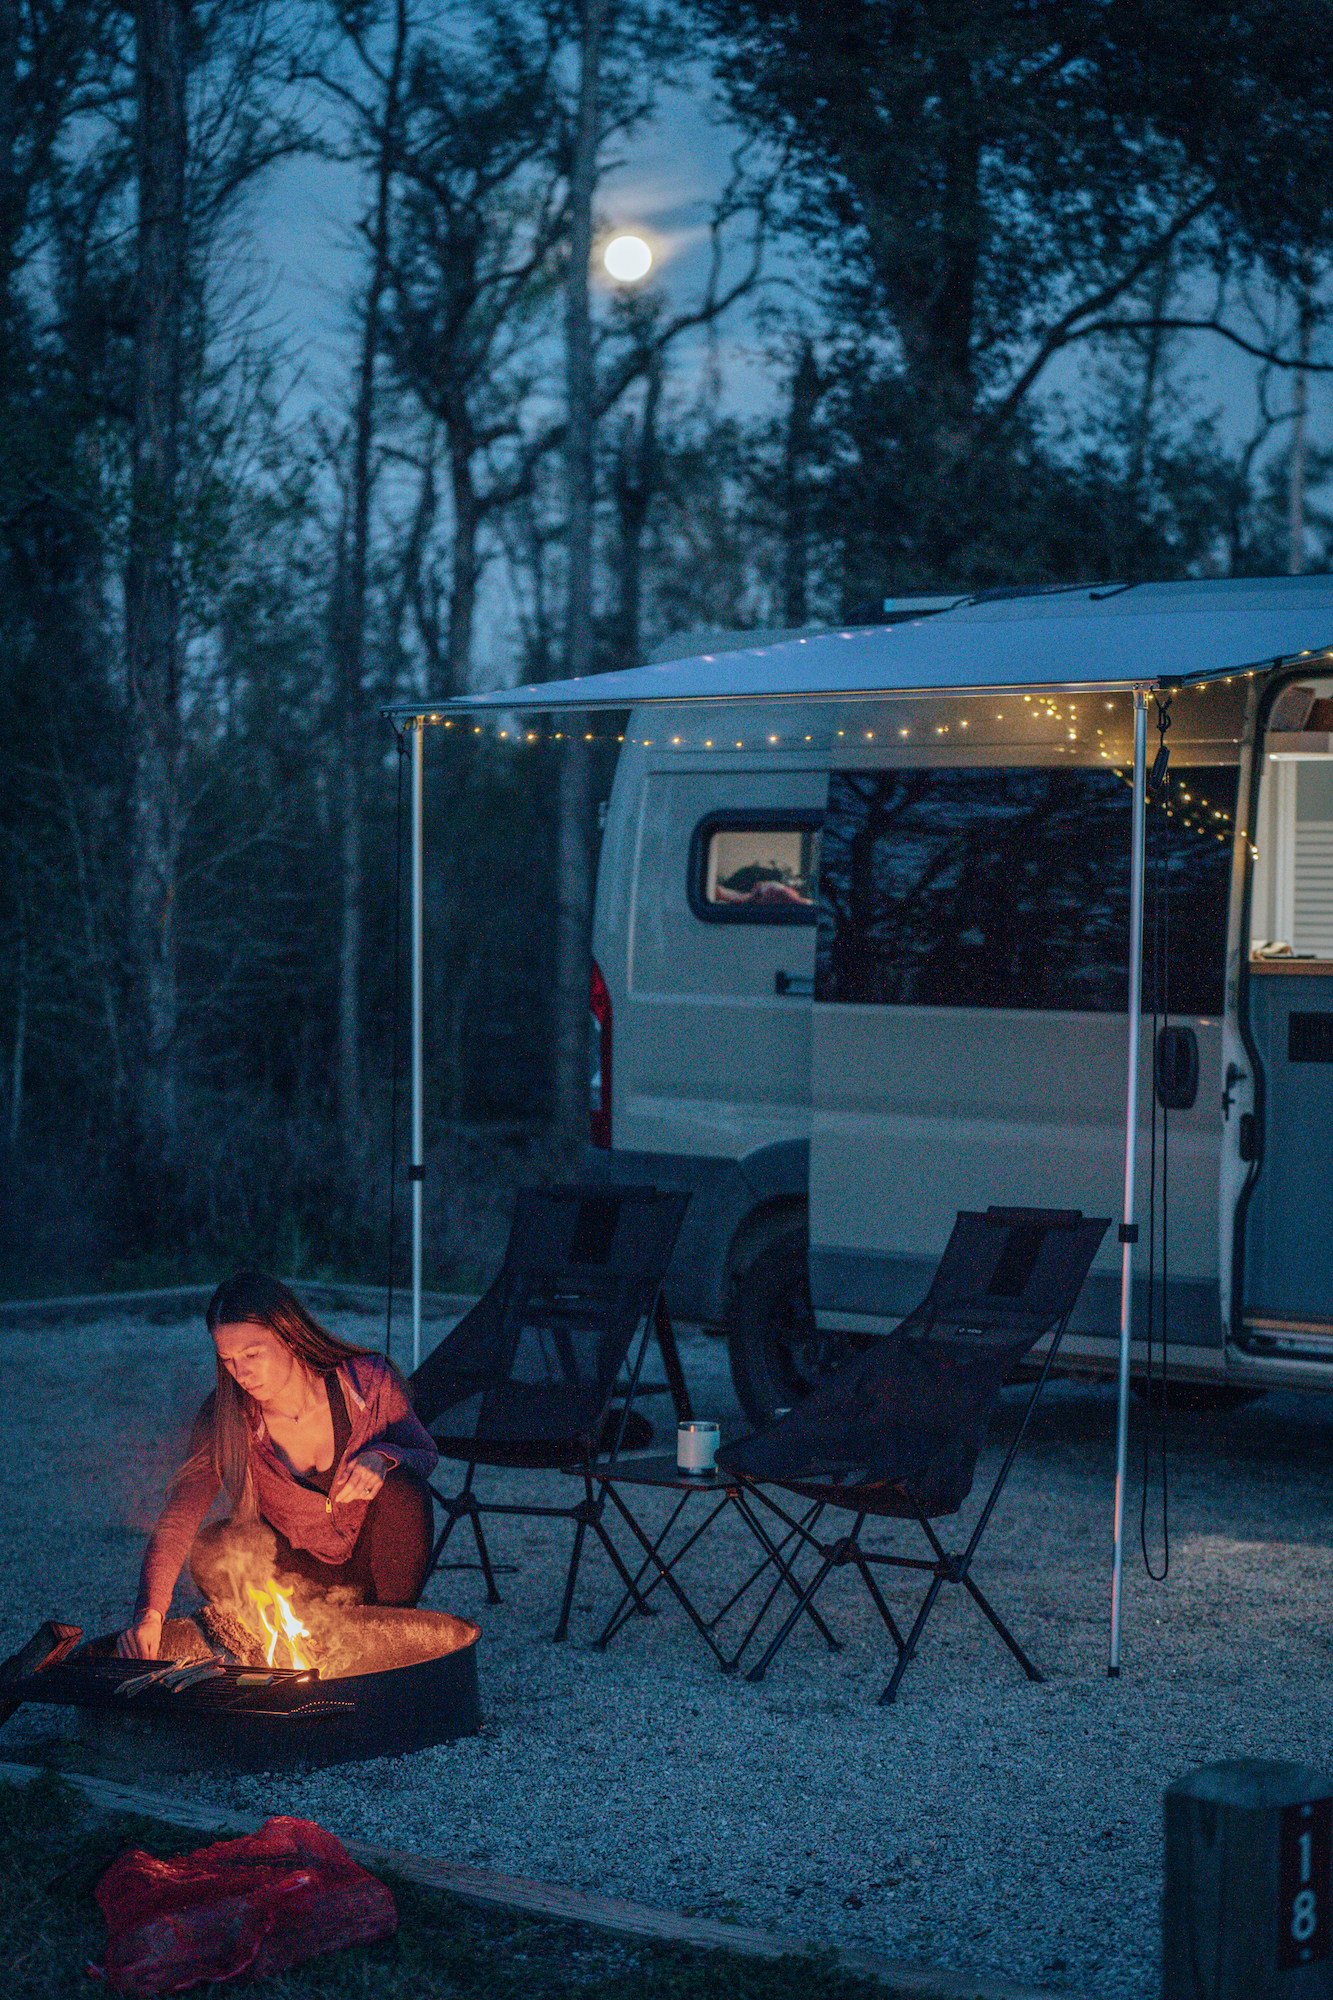 Roam Adventure Co Rooftop Awning